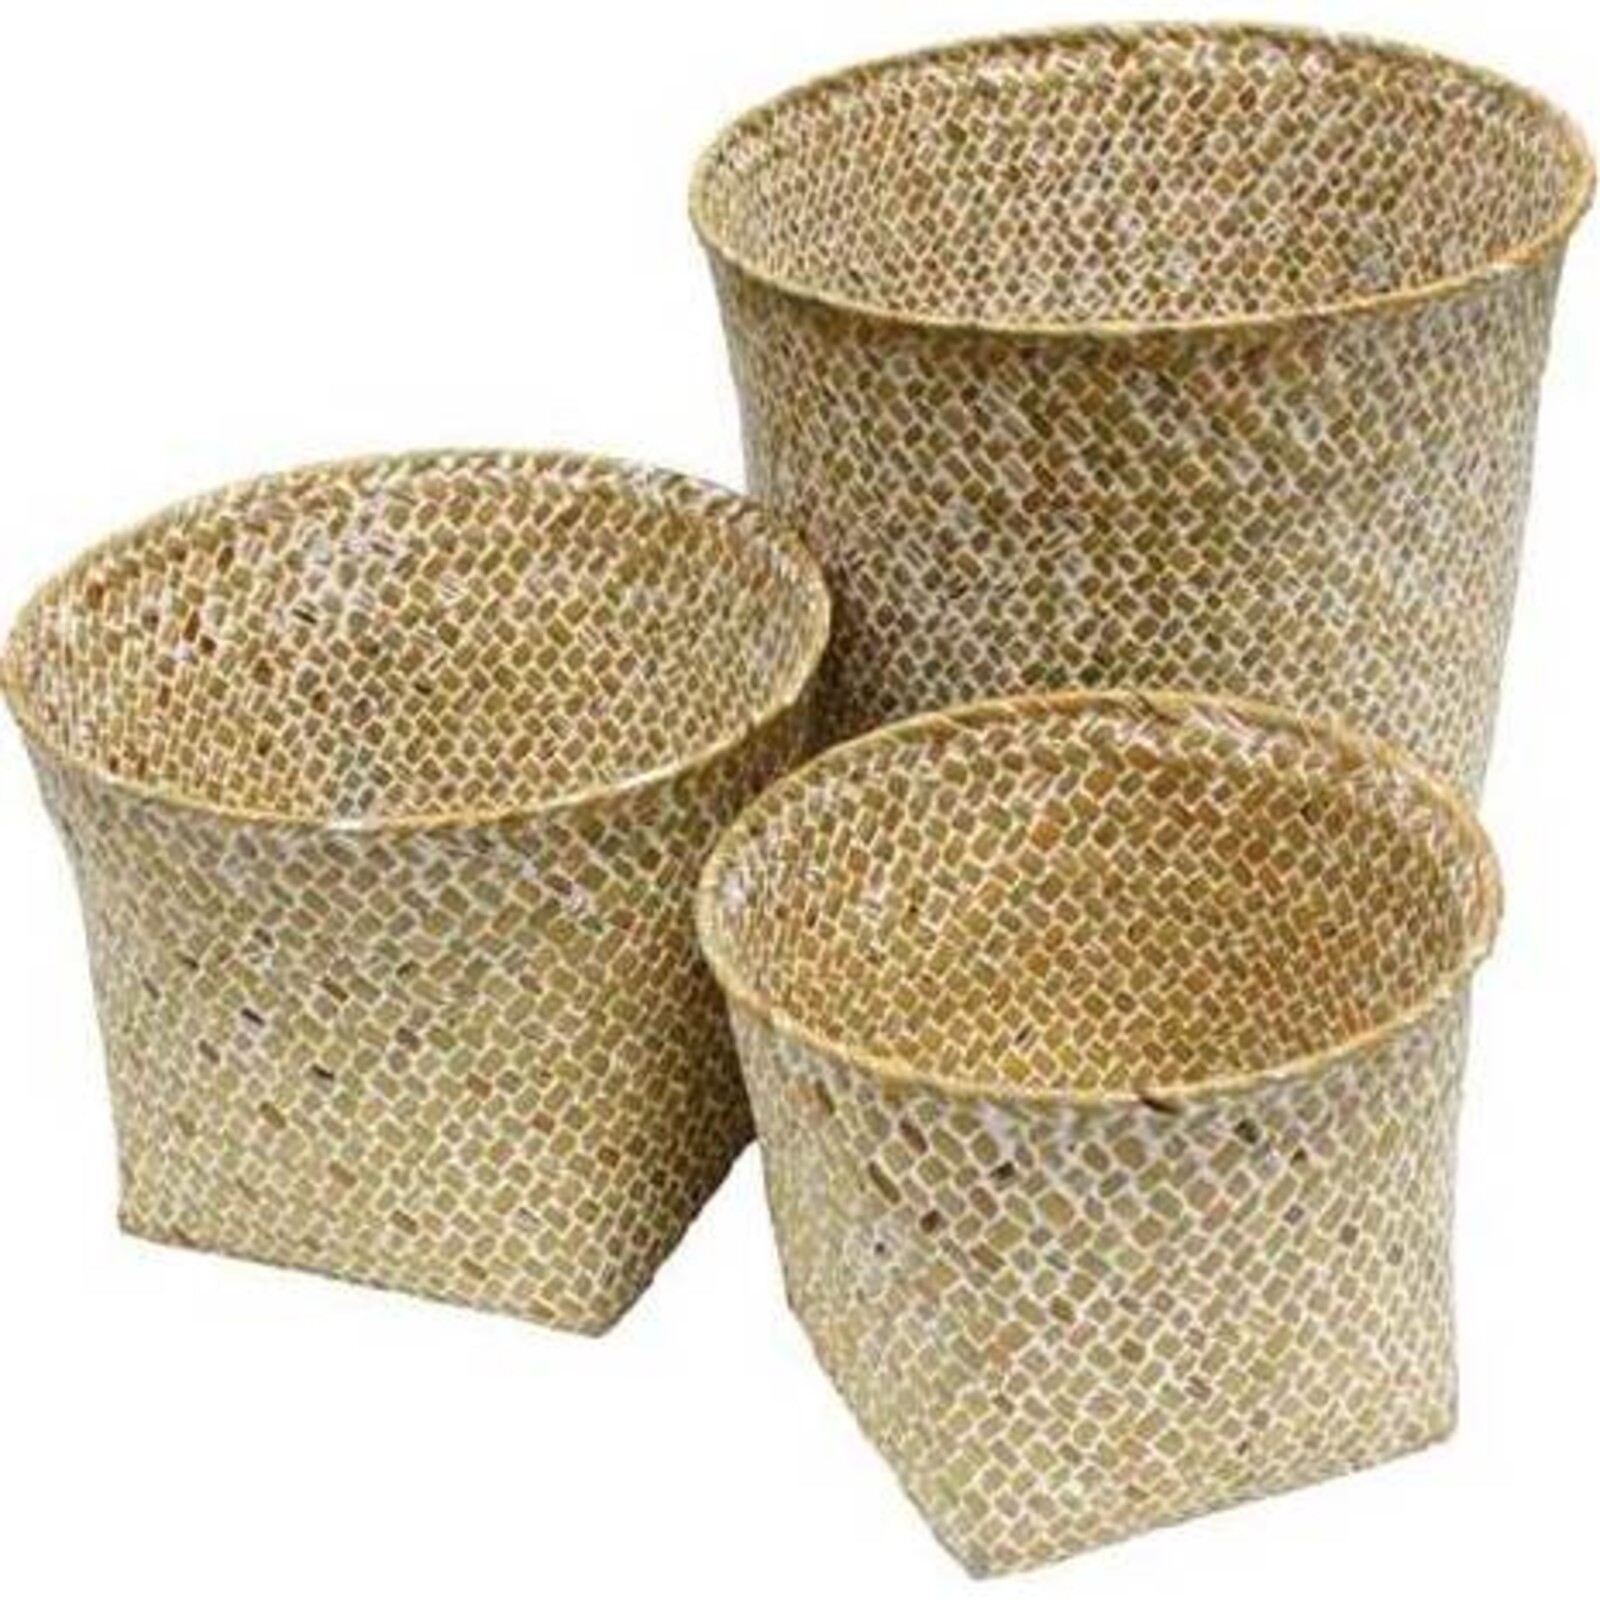 Woven Baskets Natural S/3